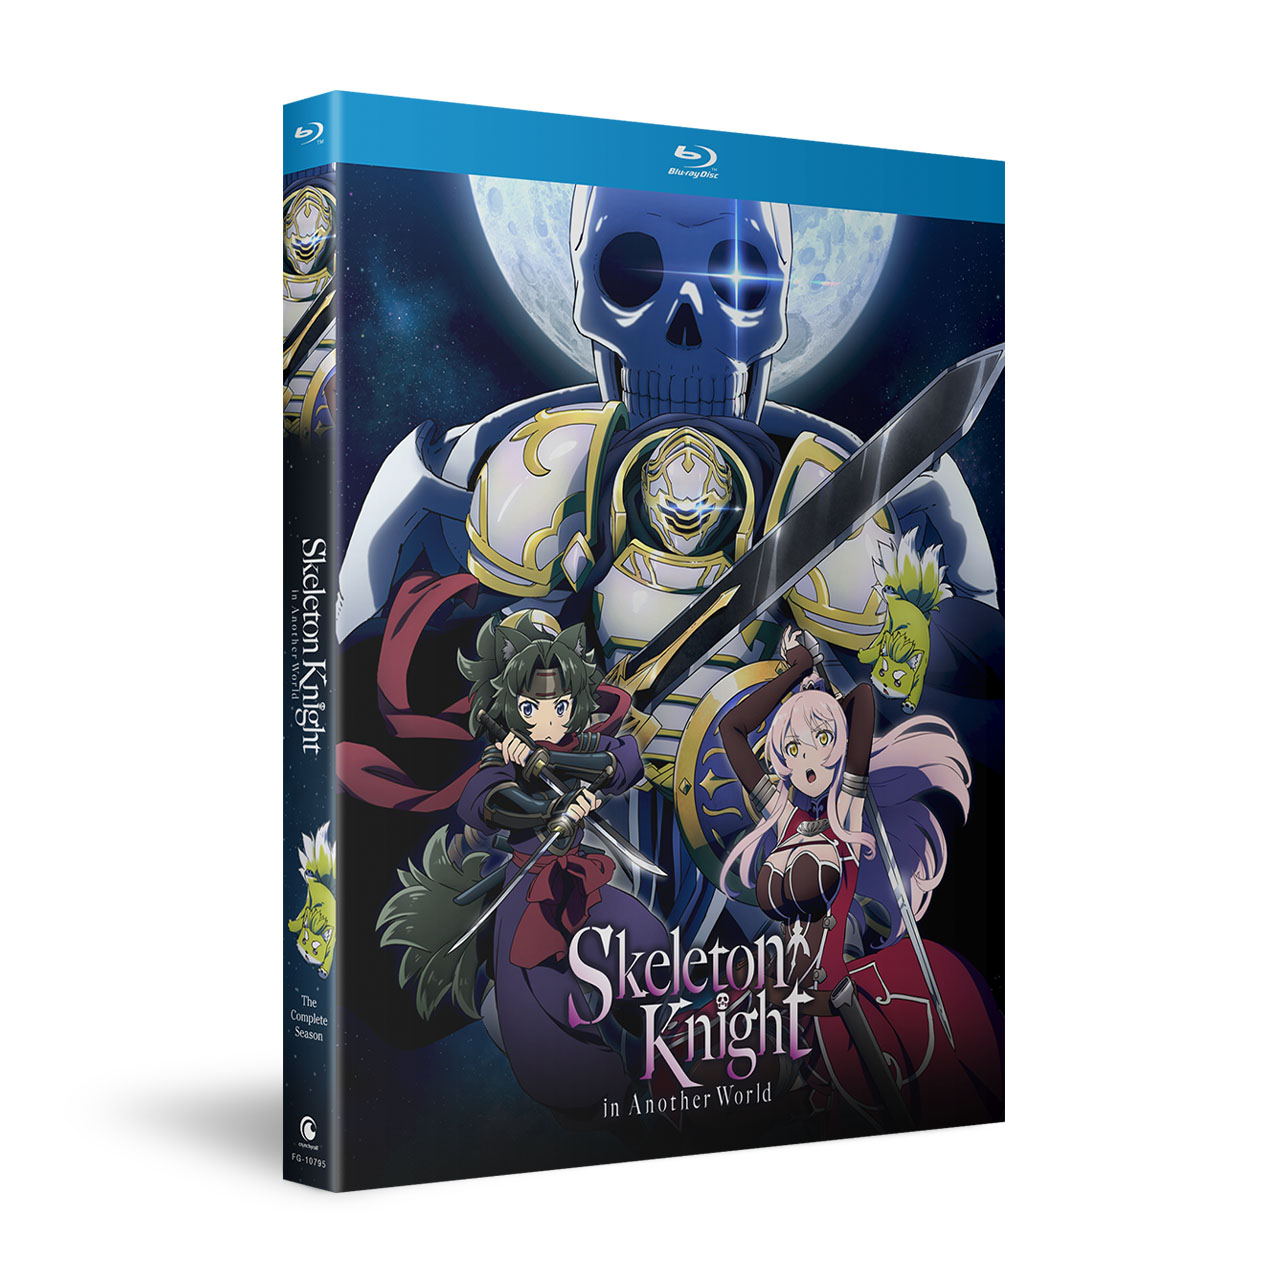 Skeleton Knight in Another World - The Complete Season - Blu-ray image count 1